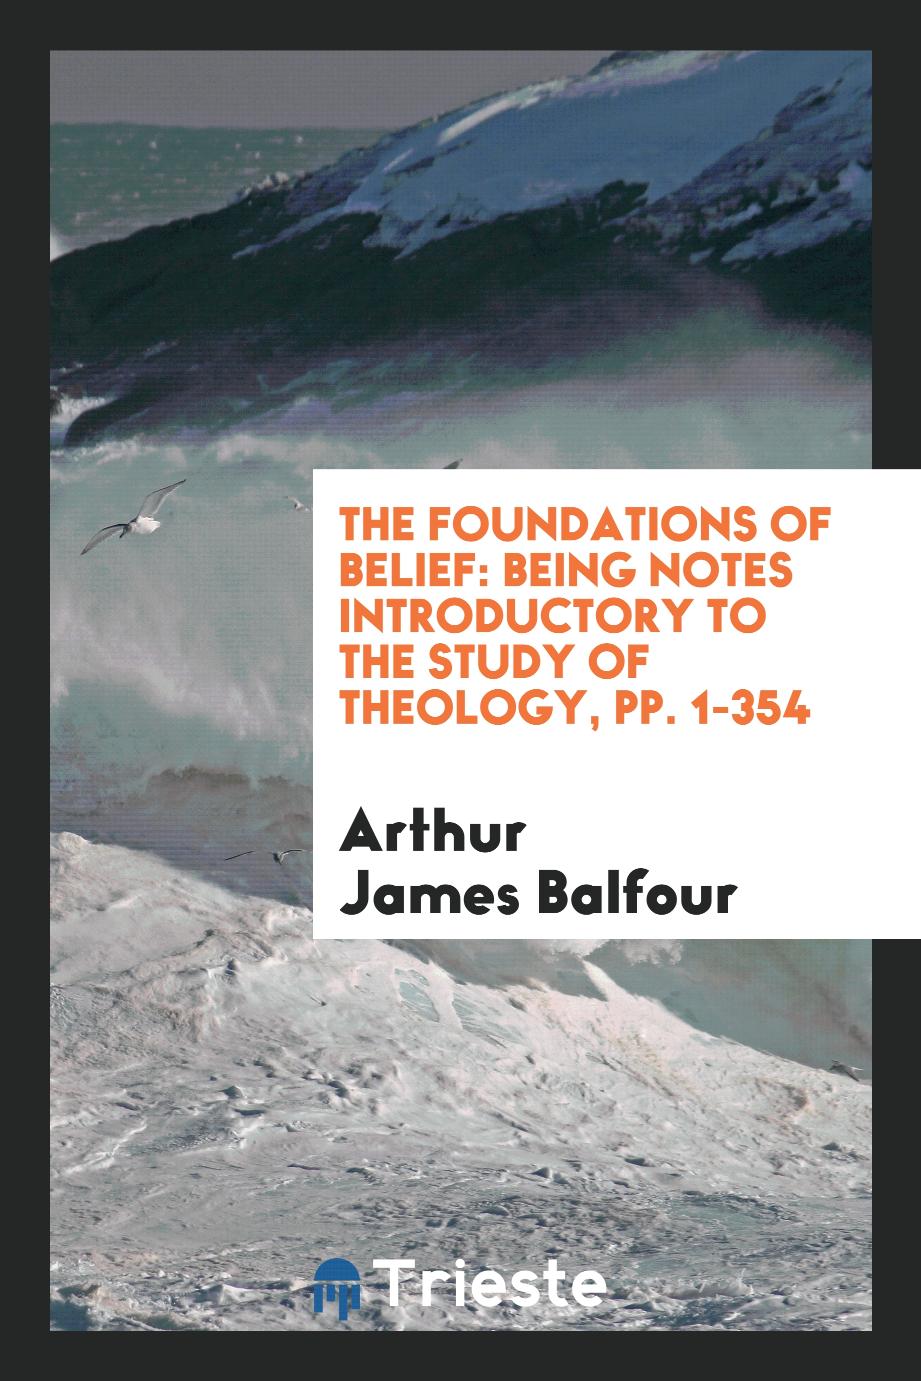 The Foundations of Belief: Being Notes Introductory to the Study of Theology, pp. 1-354